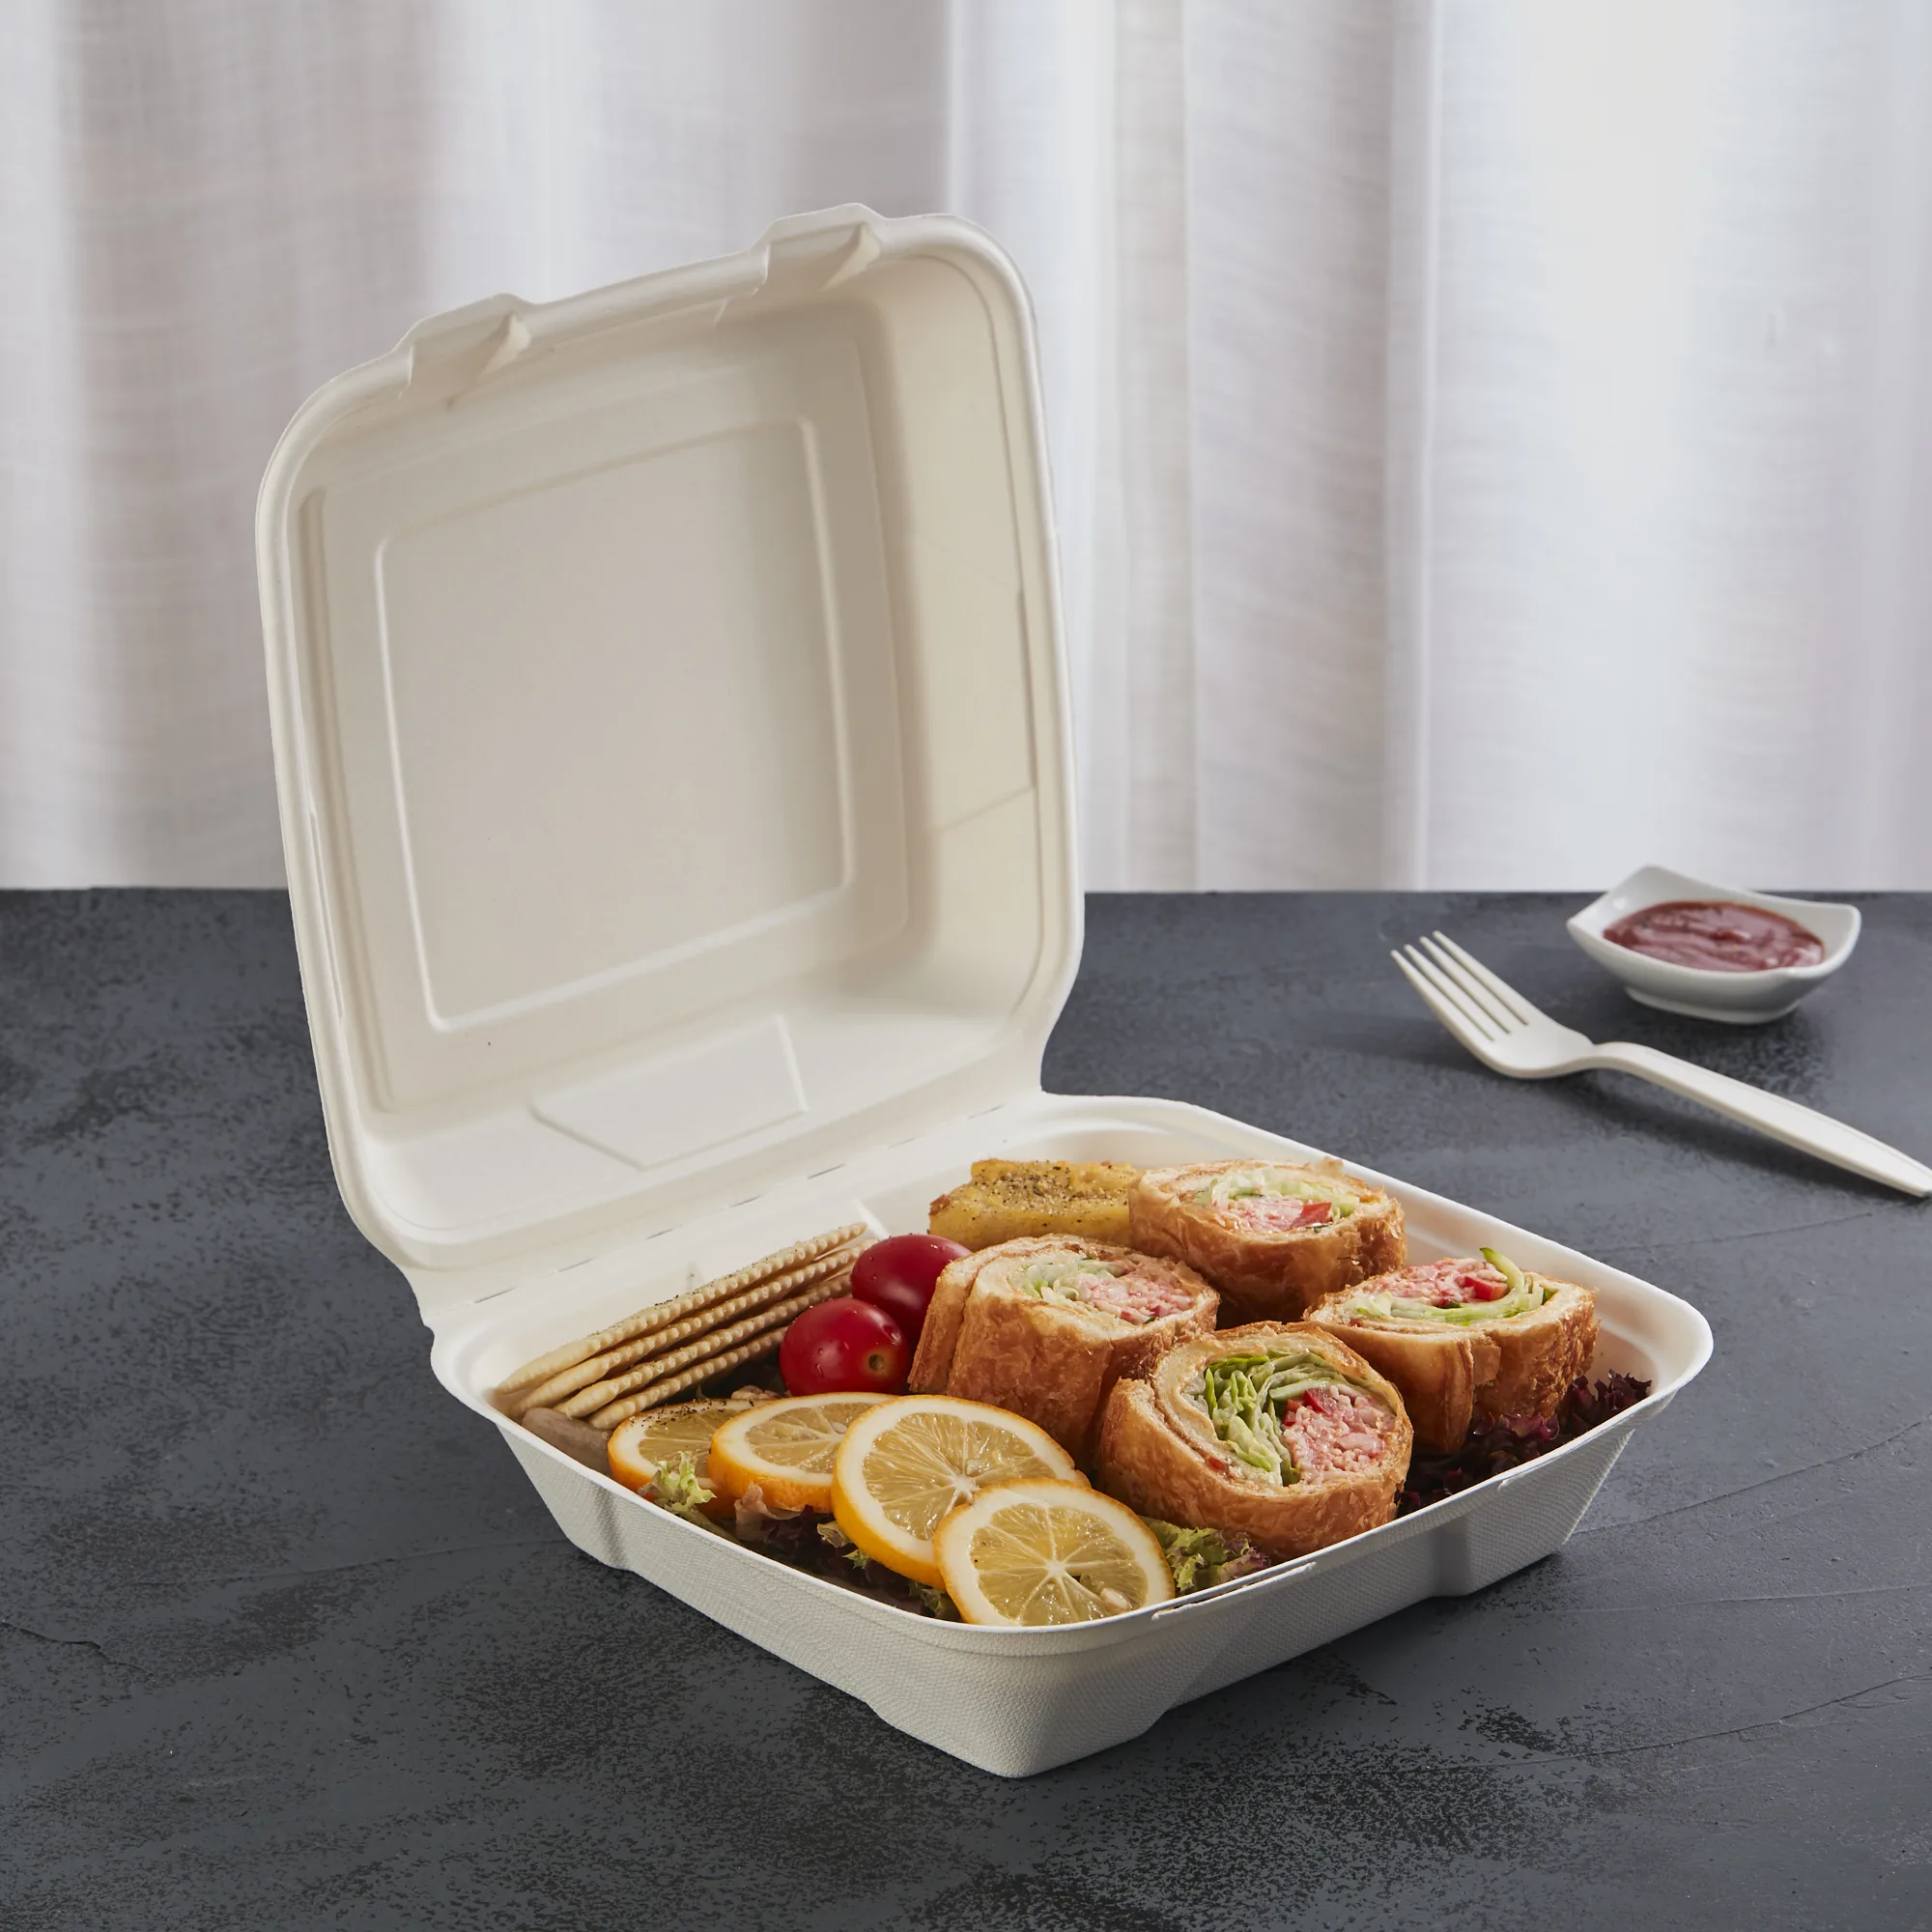 Disposable Biodegradable Lunch Sugar Cane Pulp Boxes For Sandwich - Buy ...